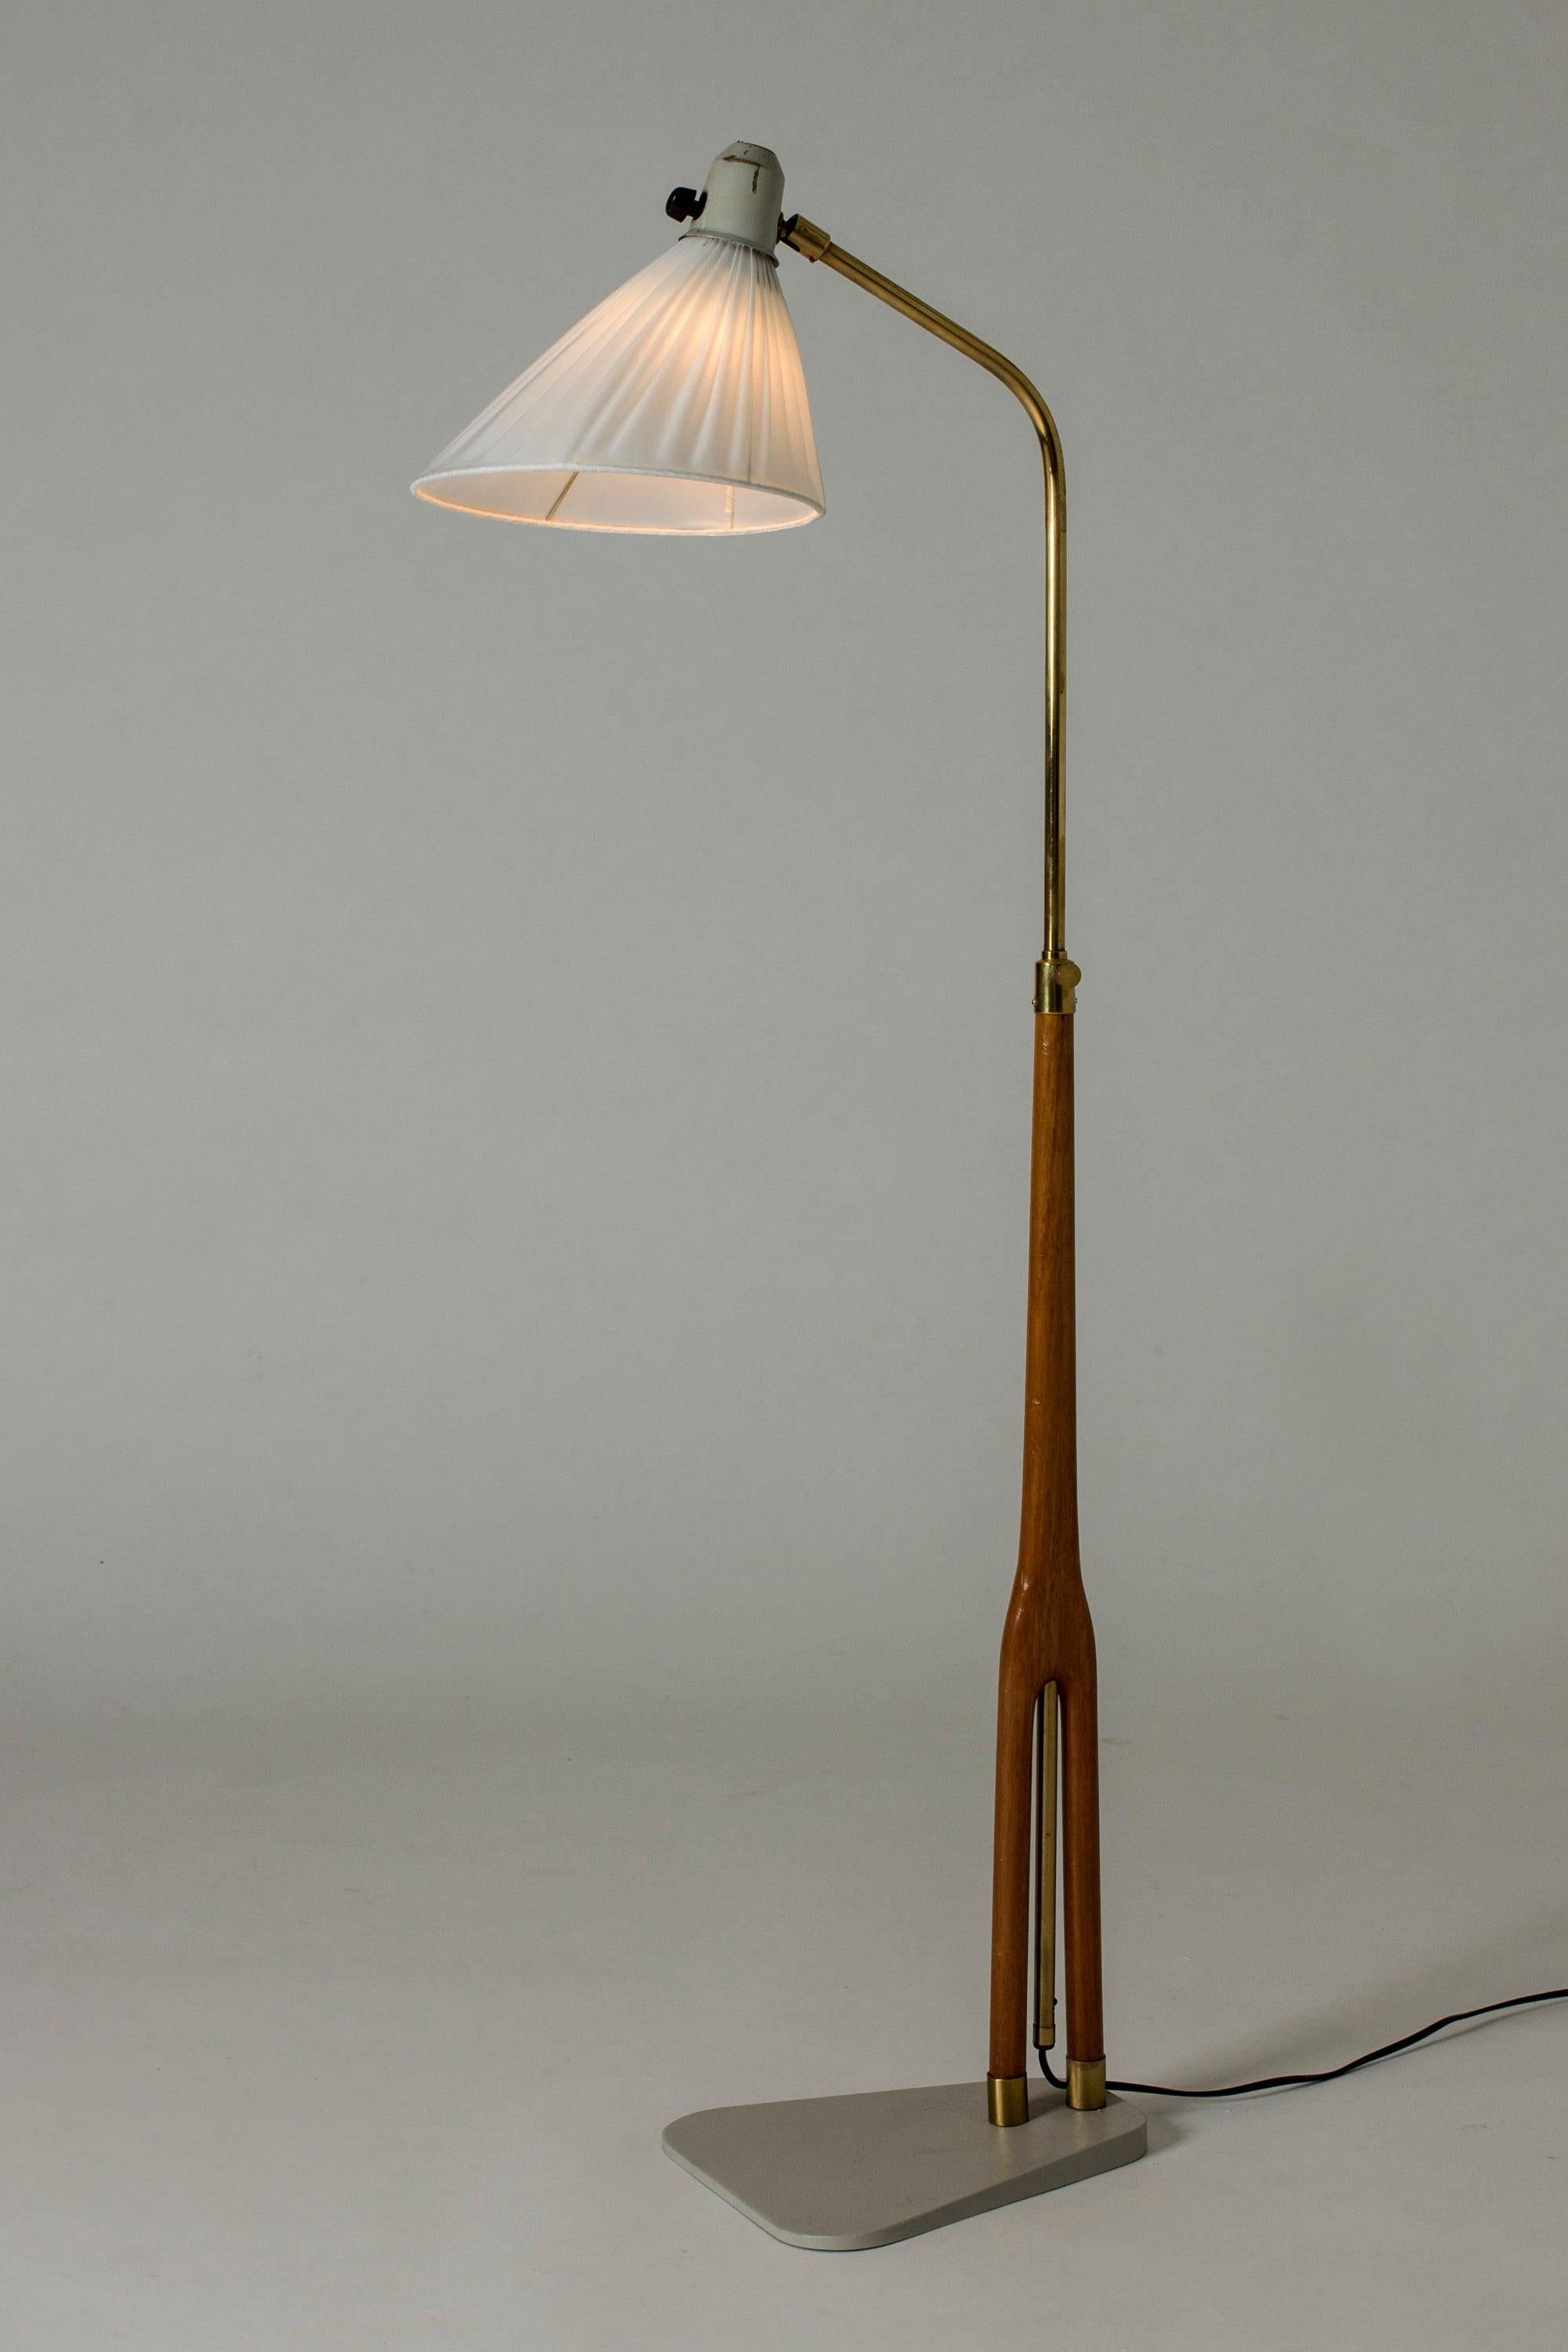 Cool floor lamp from ASEA, with a wide flat base in grey lacquered metal. Wood and brass handle. Graphic lines and nice combination of materials.